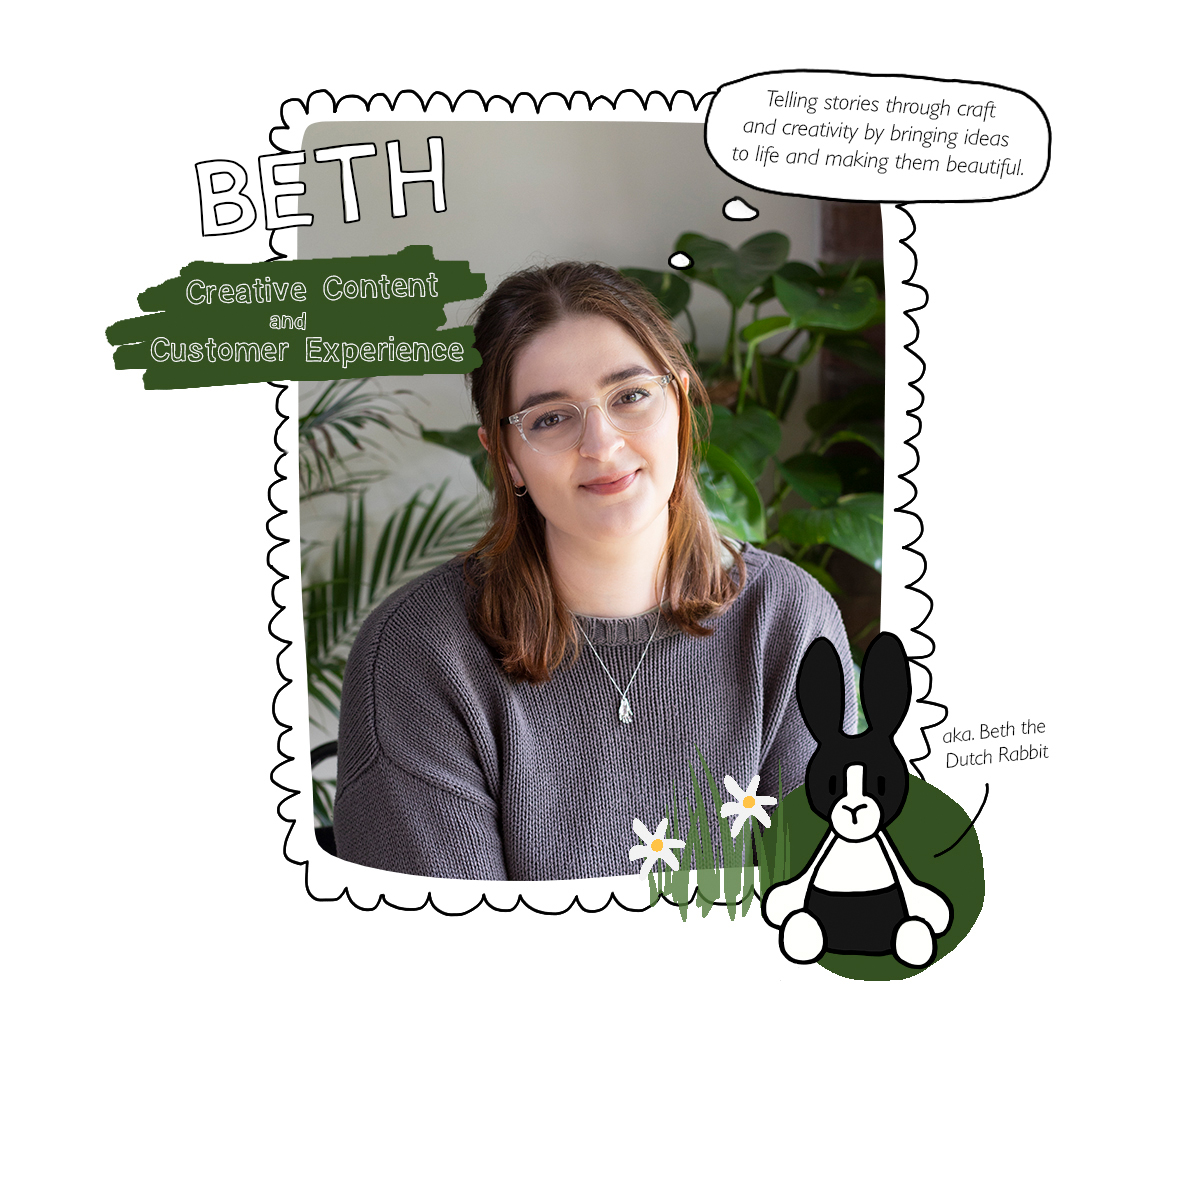 Beth: Creative Content and Customer Experience